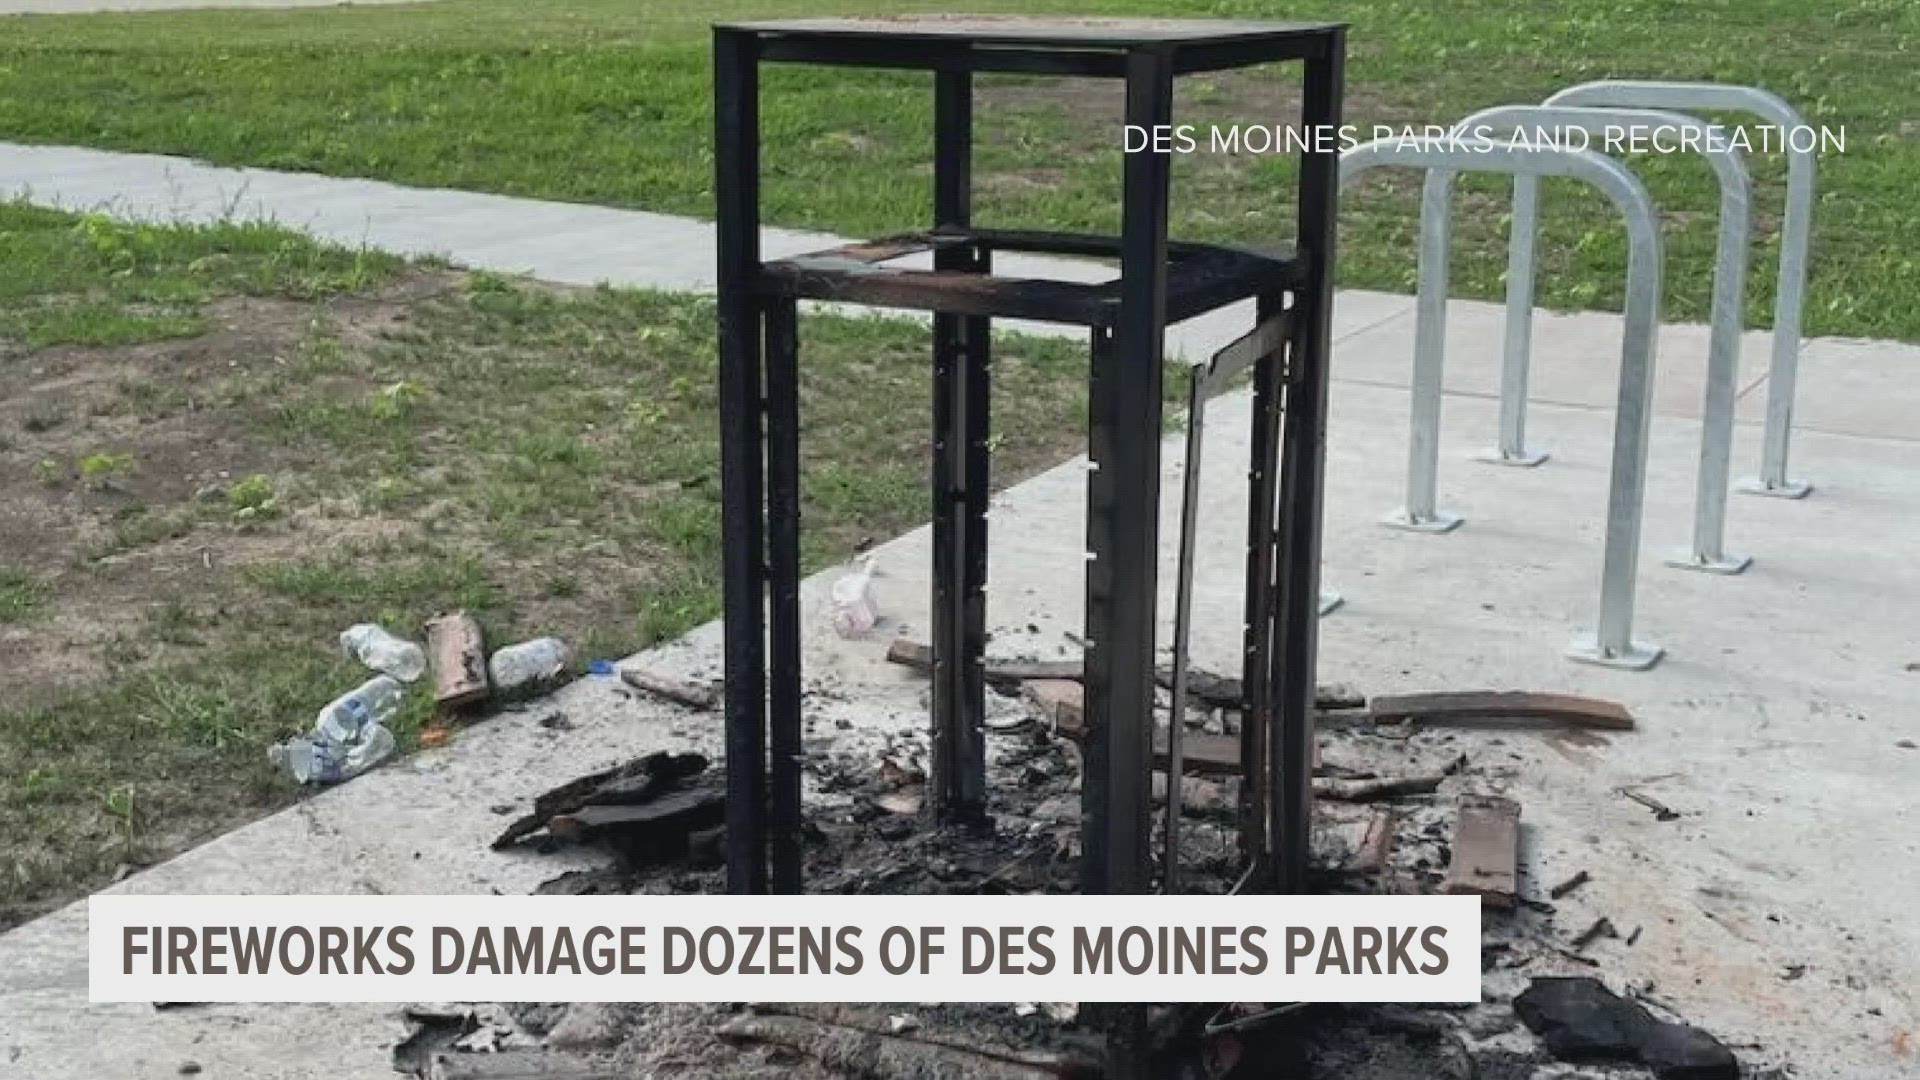 Des Moines Parks and Recreation say vandals destroyed nearly 40% of their parks with fireworks the past few days. So how long will the clean-up process take?